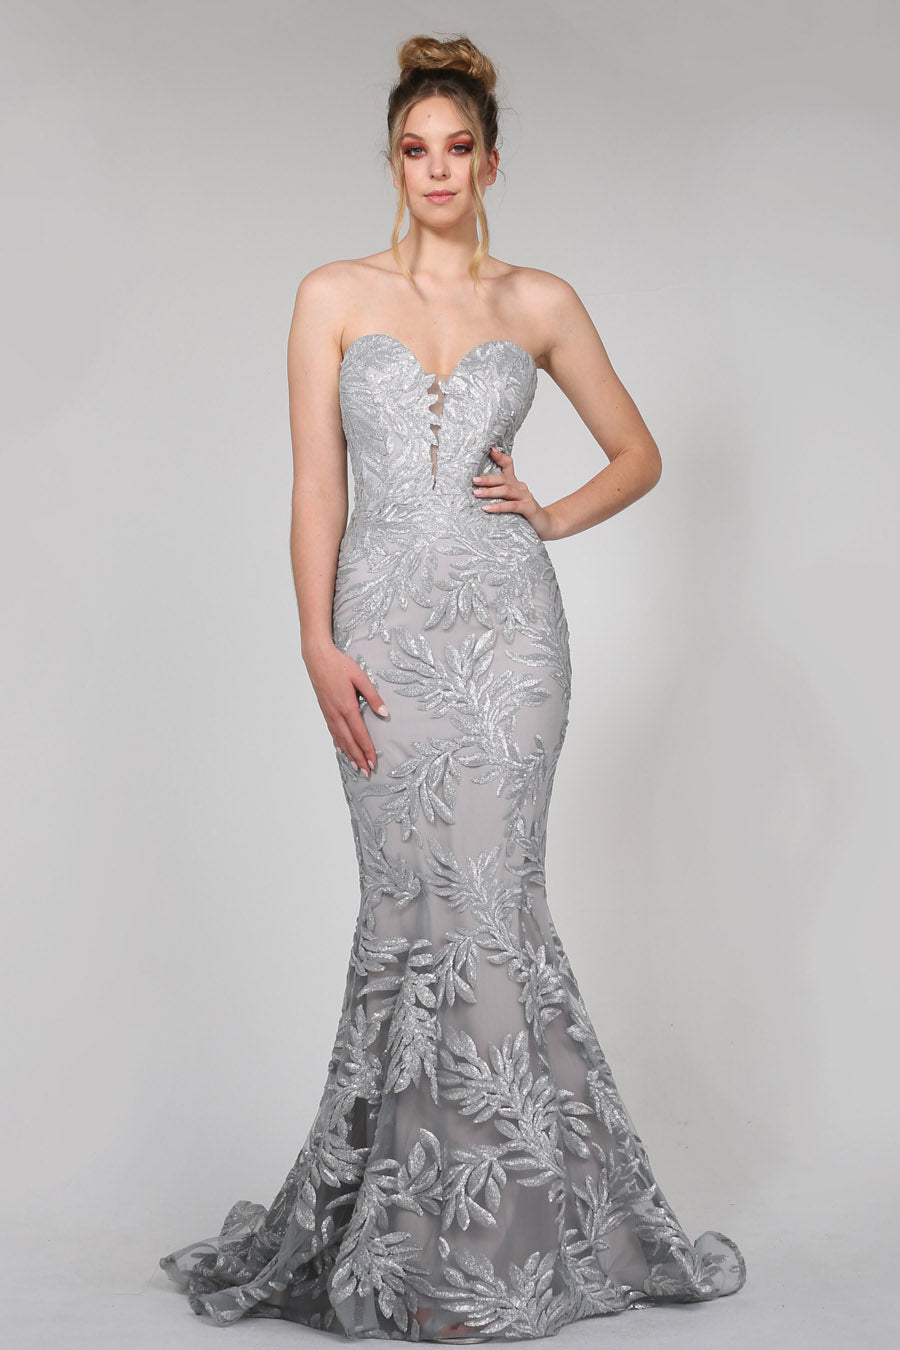 Tina Holly Couture TA107 Silver Sequin &amp; Mesh Strapless Mermaid Formal Dress {vendor} AfterPay Humm ZipPay LayBuy Sezzle